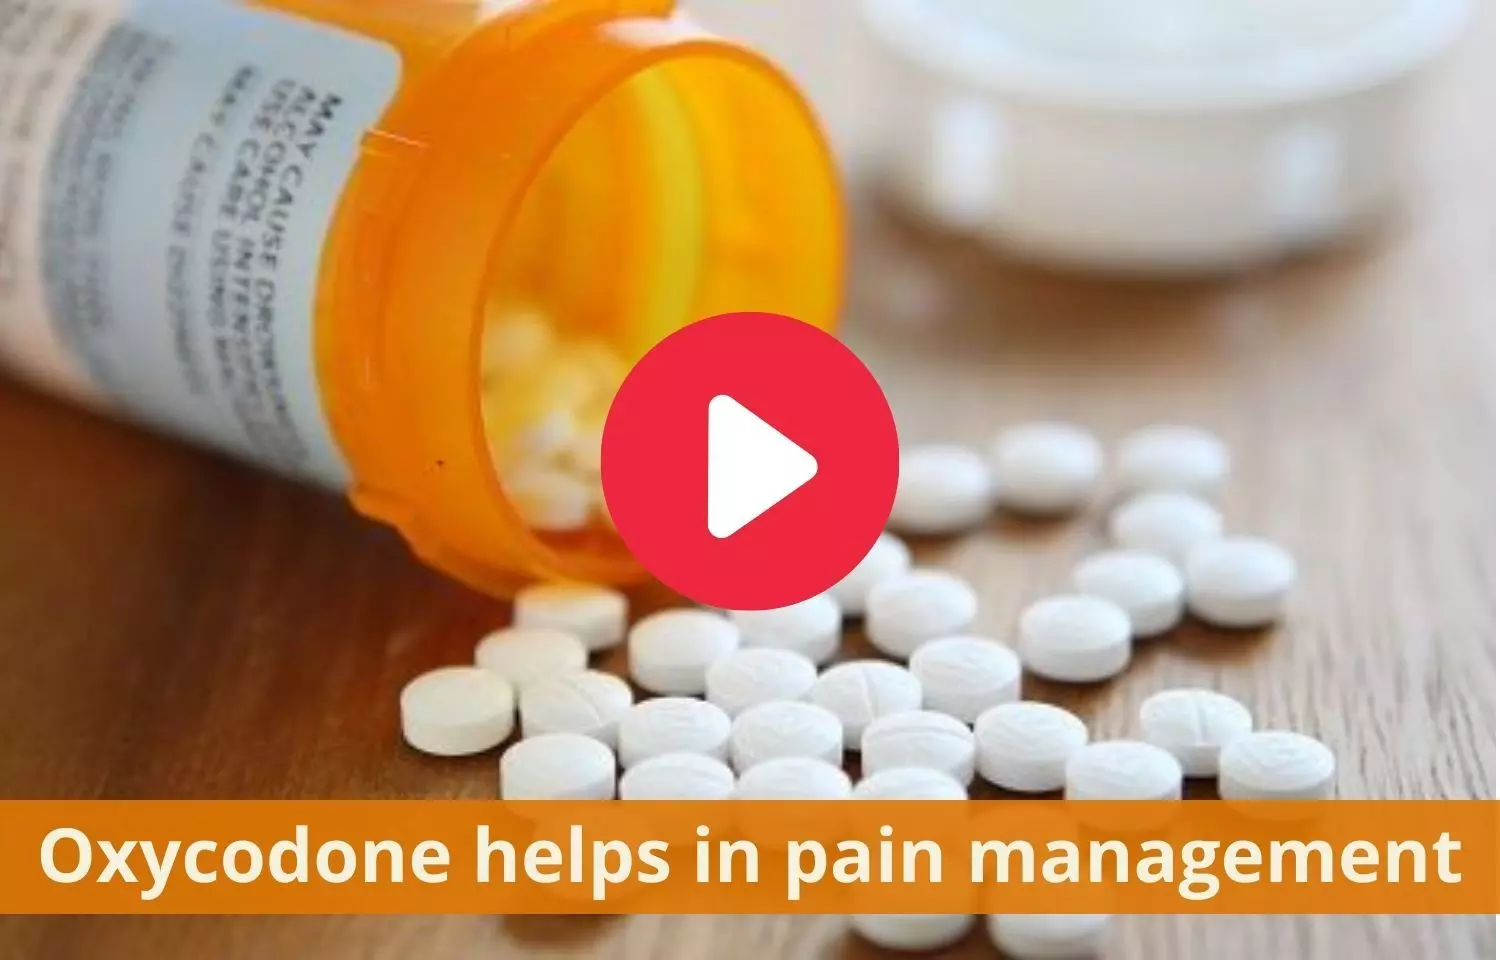 Oxycodone similar to acetaminophen and codeine combination in pain management